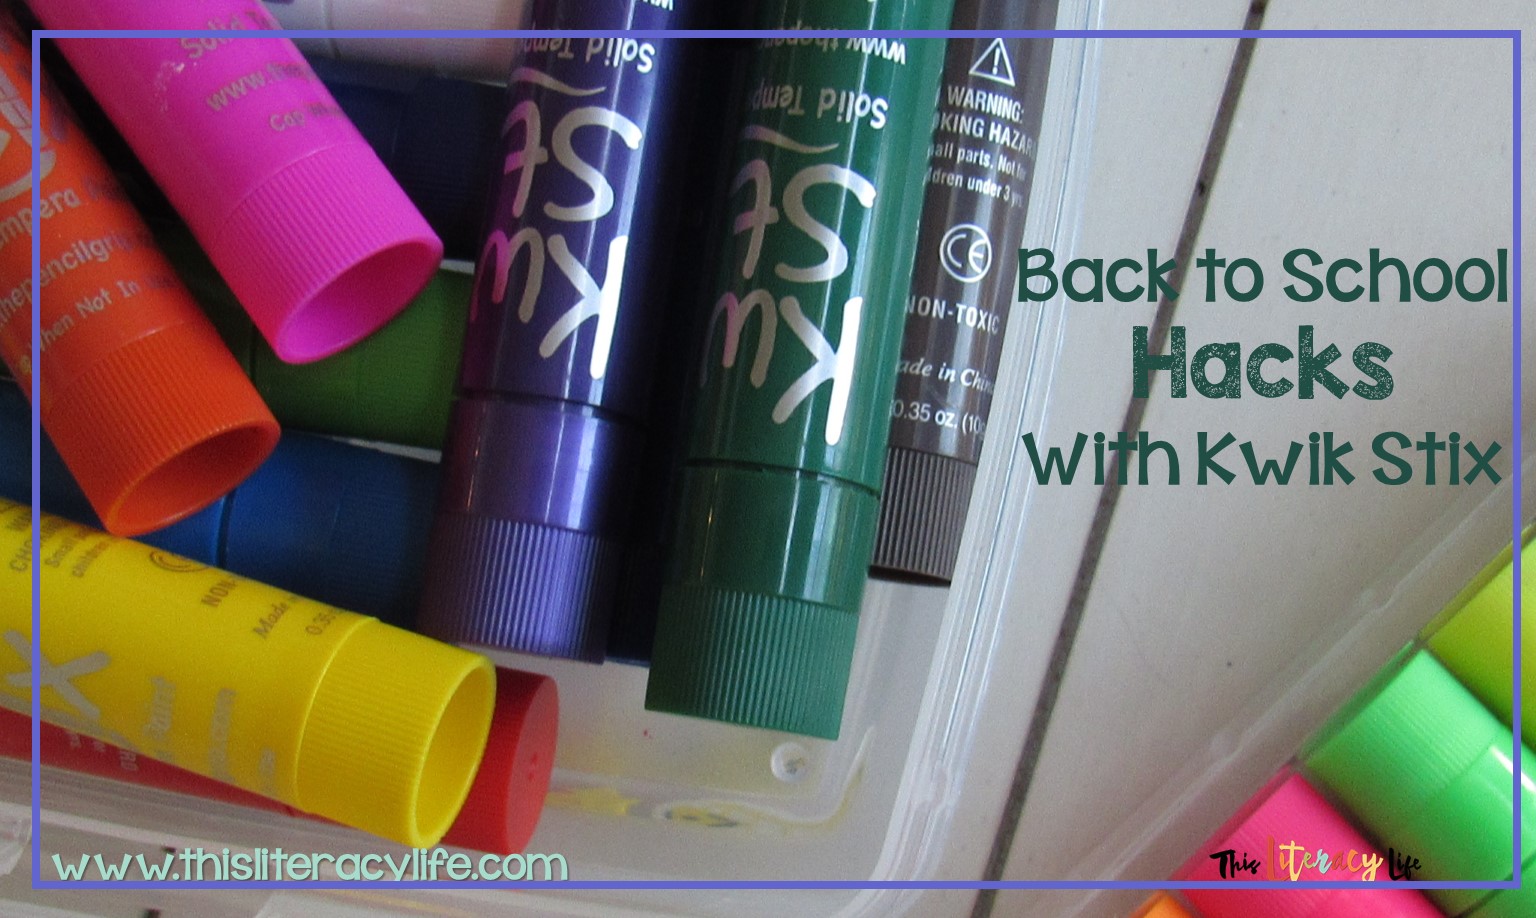 Kwik Stix are a great tool for helping students as they work in your classroom. These 5 hacks will give them new ways to work and not make a mess!